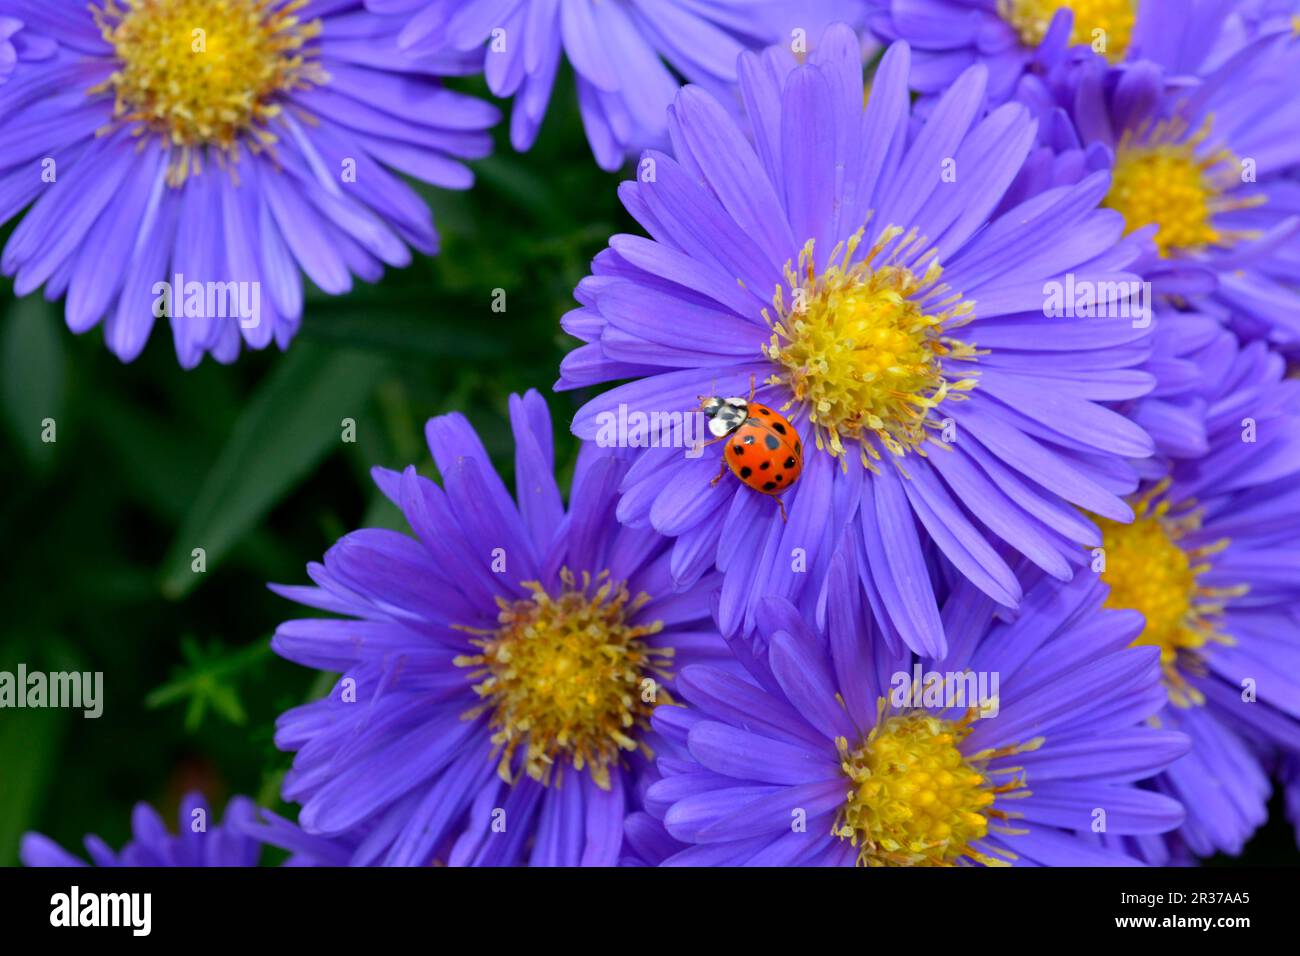 Blue Autumn Aster with Ladybird in the Garden, New Belgium Aster (Aster novi-belgii), New Belgium Autumn Aster, Smooth-leaved Aster asian lady beetle Stock Photo